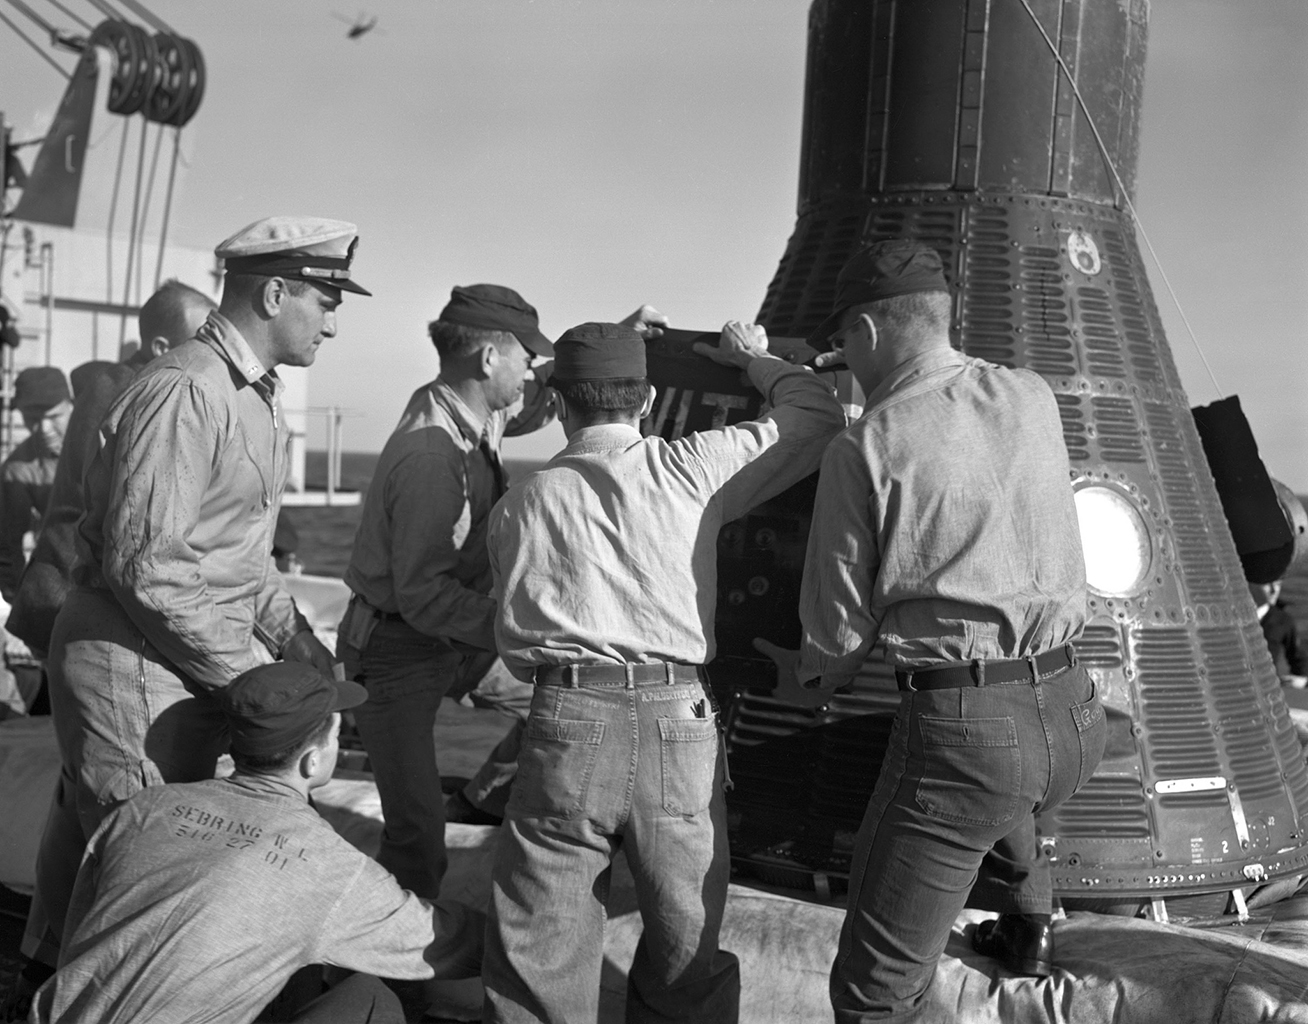 A group of men removing the hatch from a space capsule which has returned to Earth